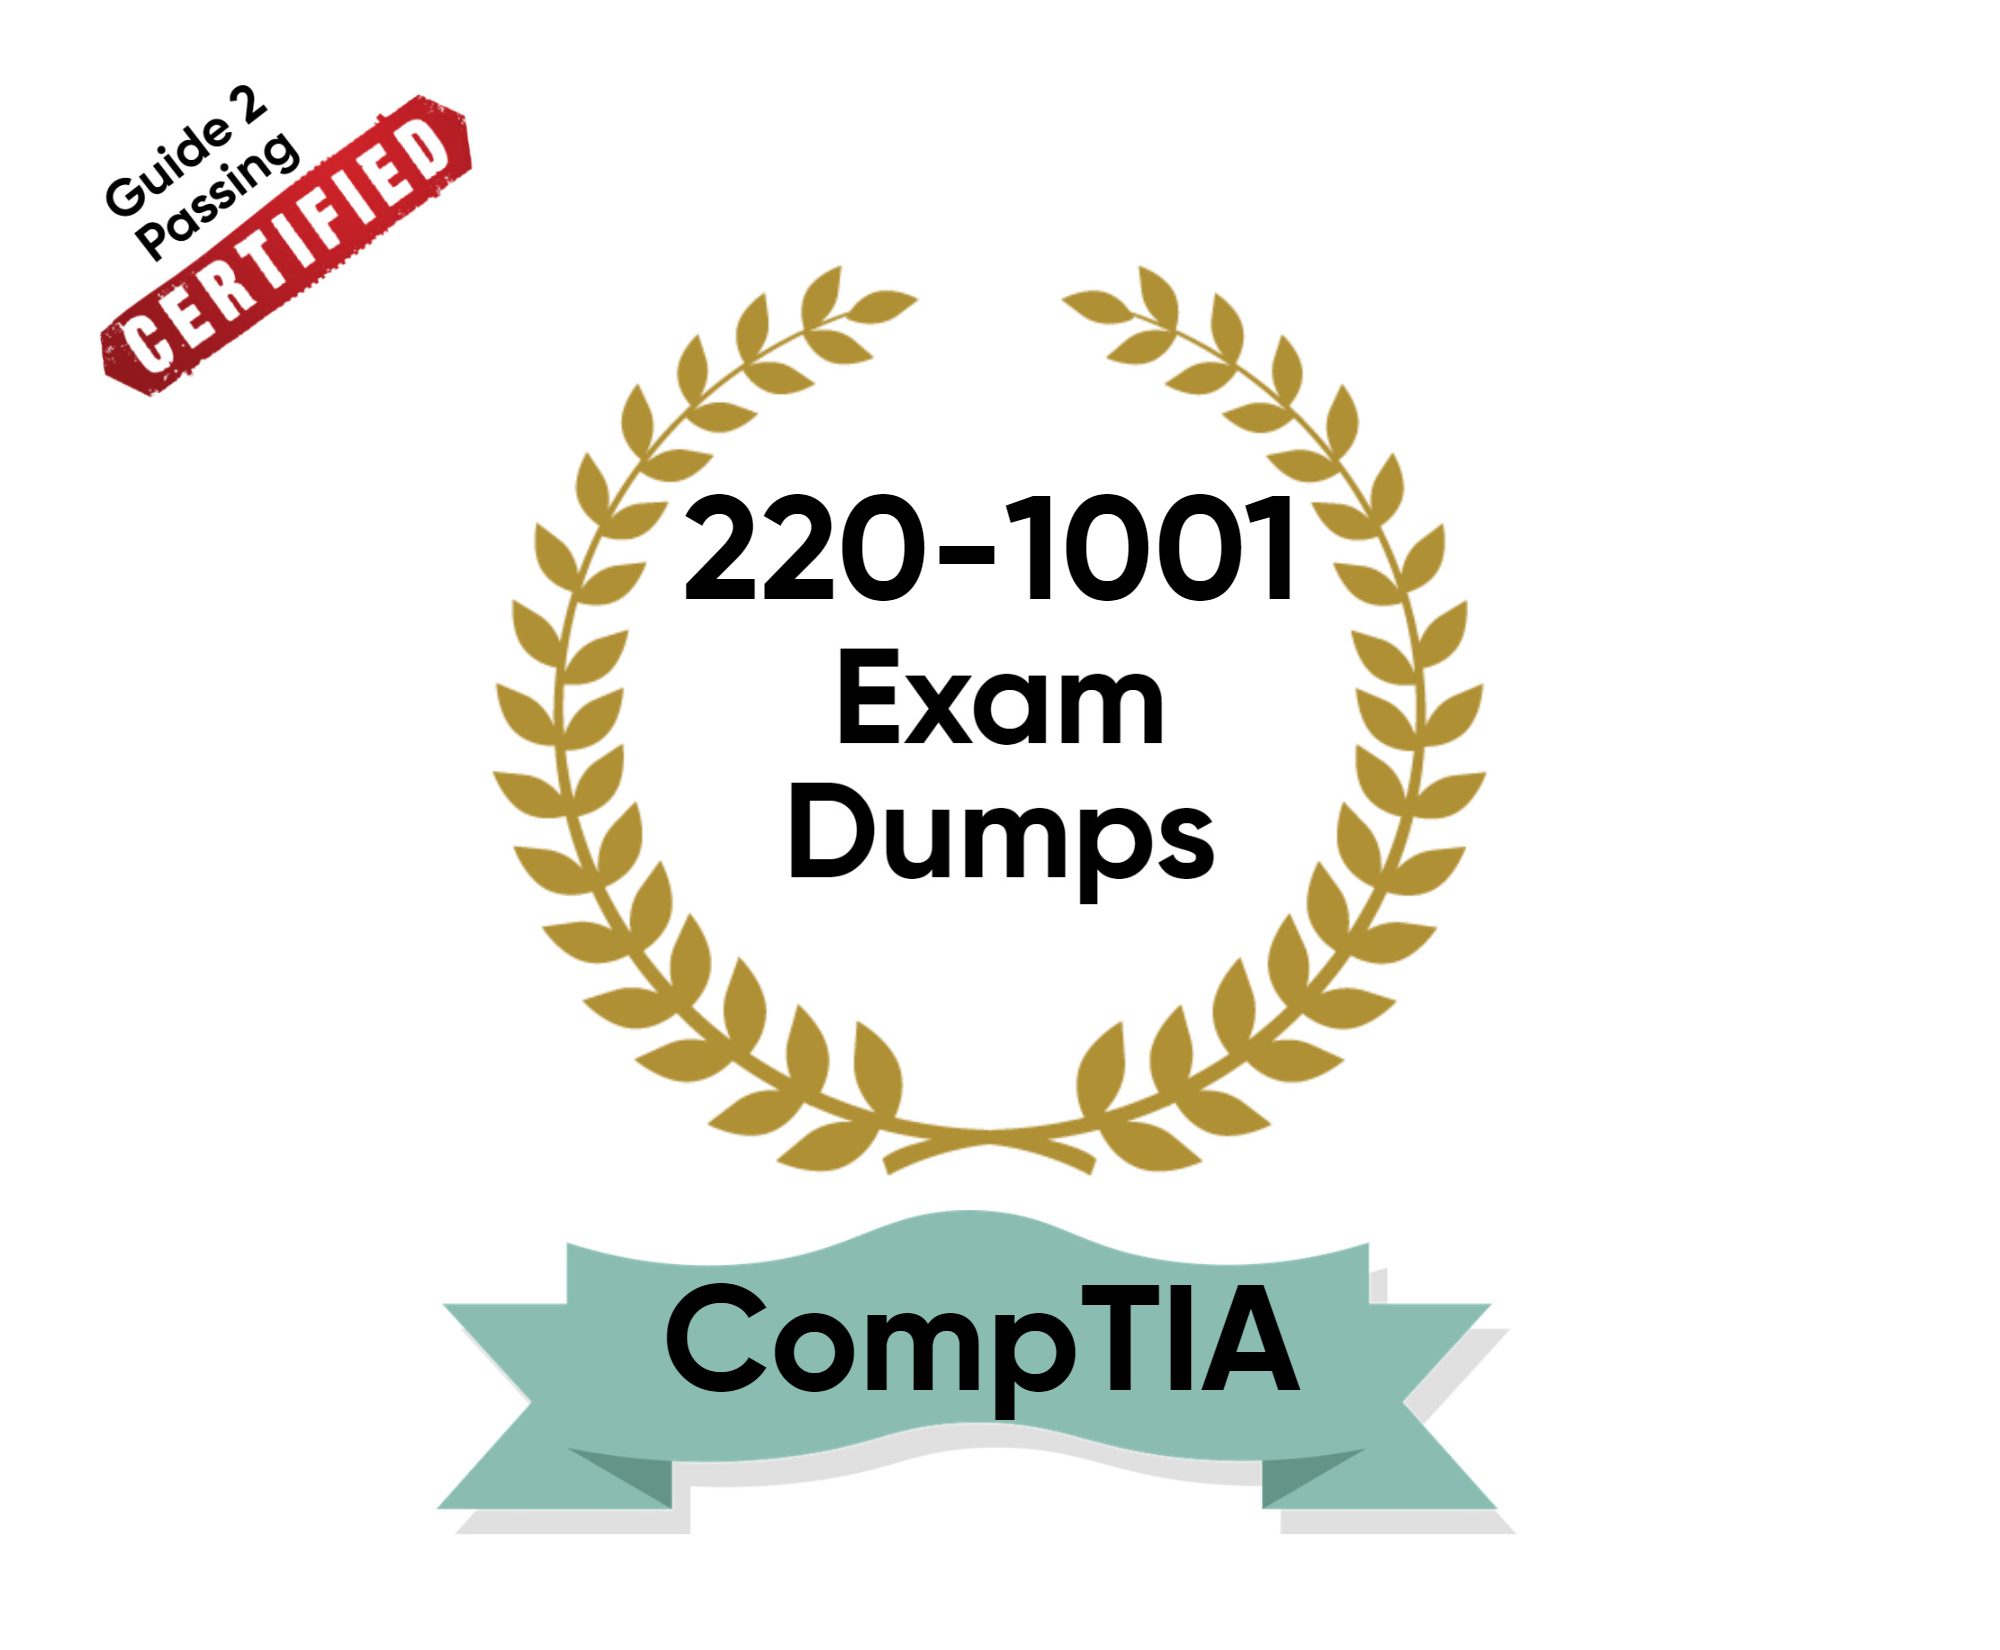 Pass Your CompTIA 220-1001 Exam Dumps From Guide 2 Passing